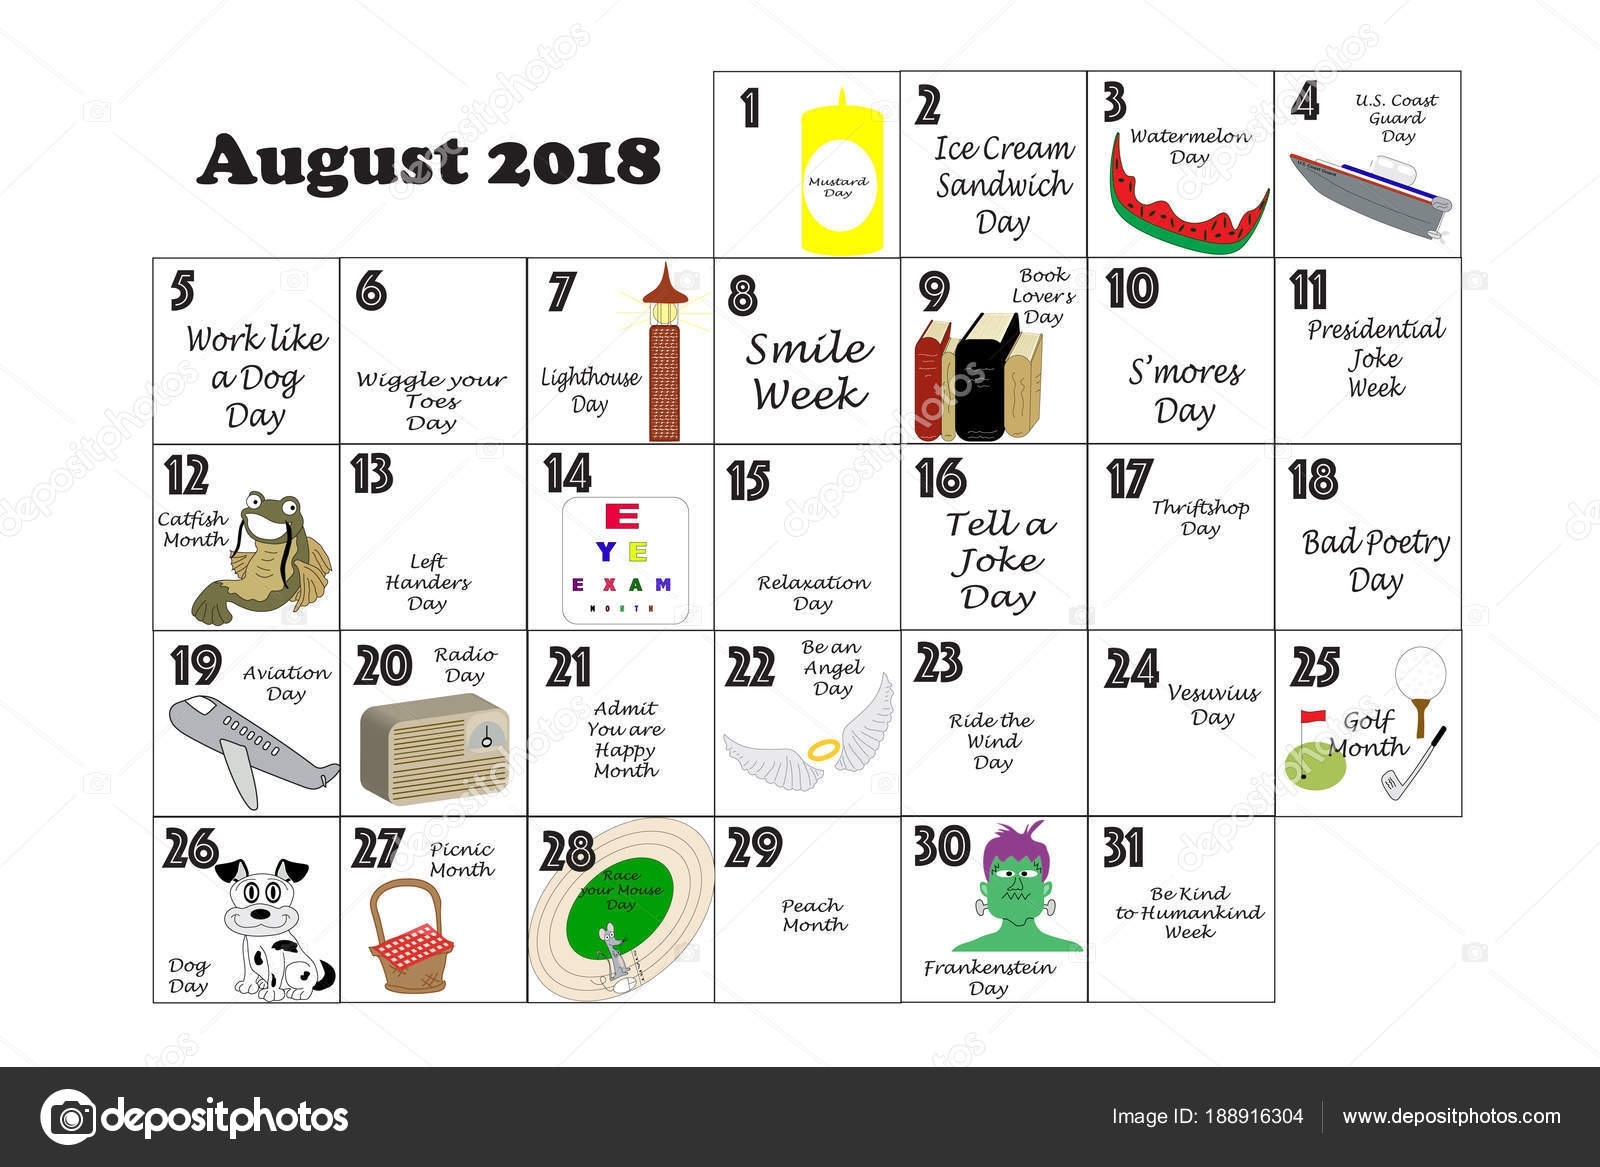 August 2018 Quirky Holidays And Unusual Events — Stock Photo Calendar Of Quirky Holidays